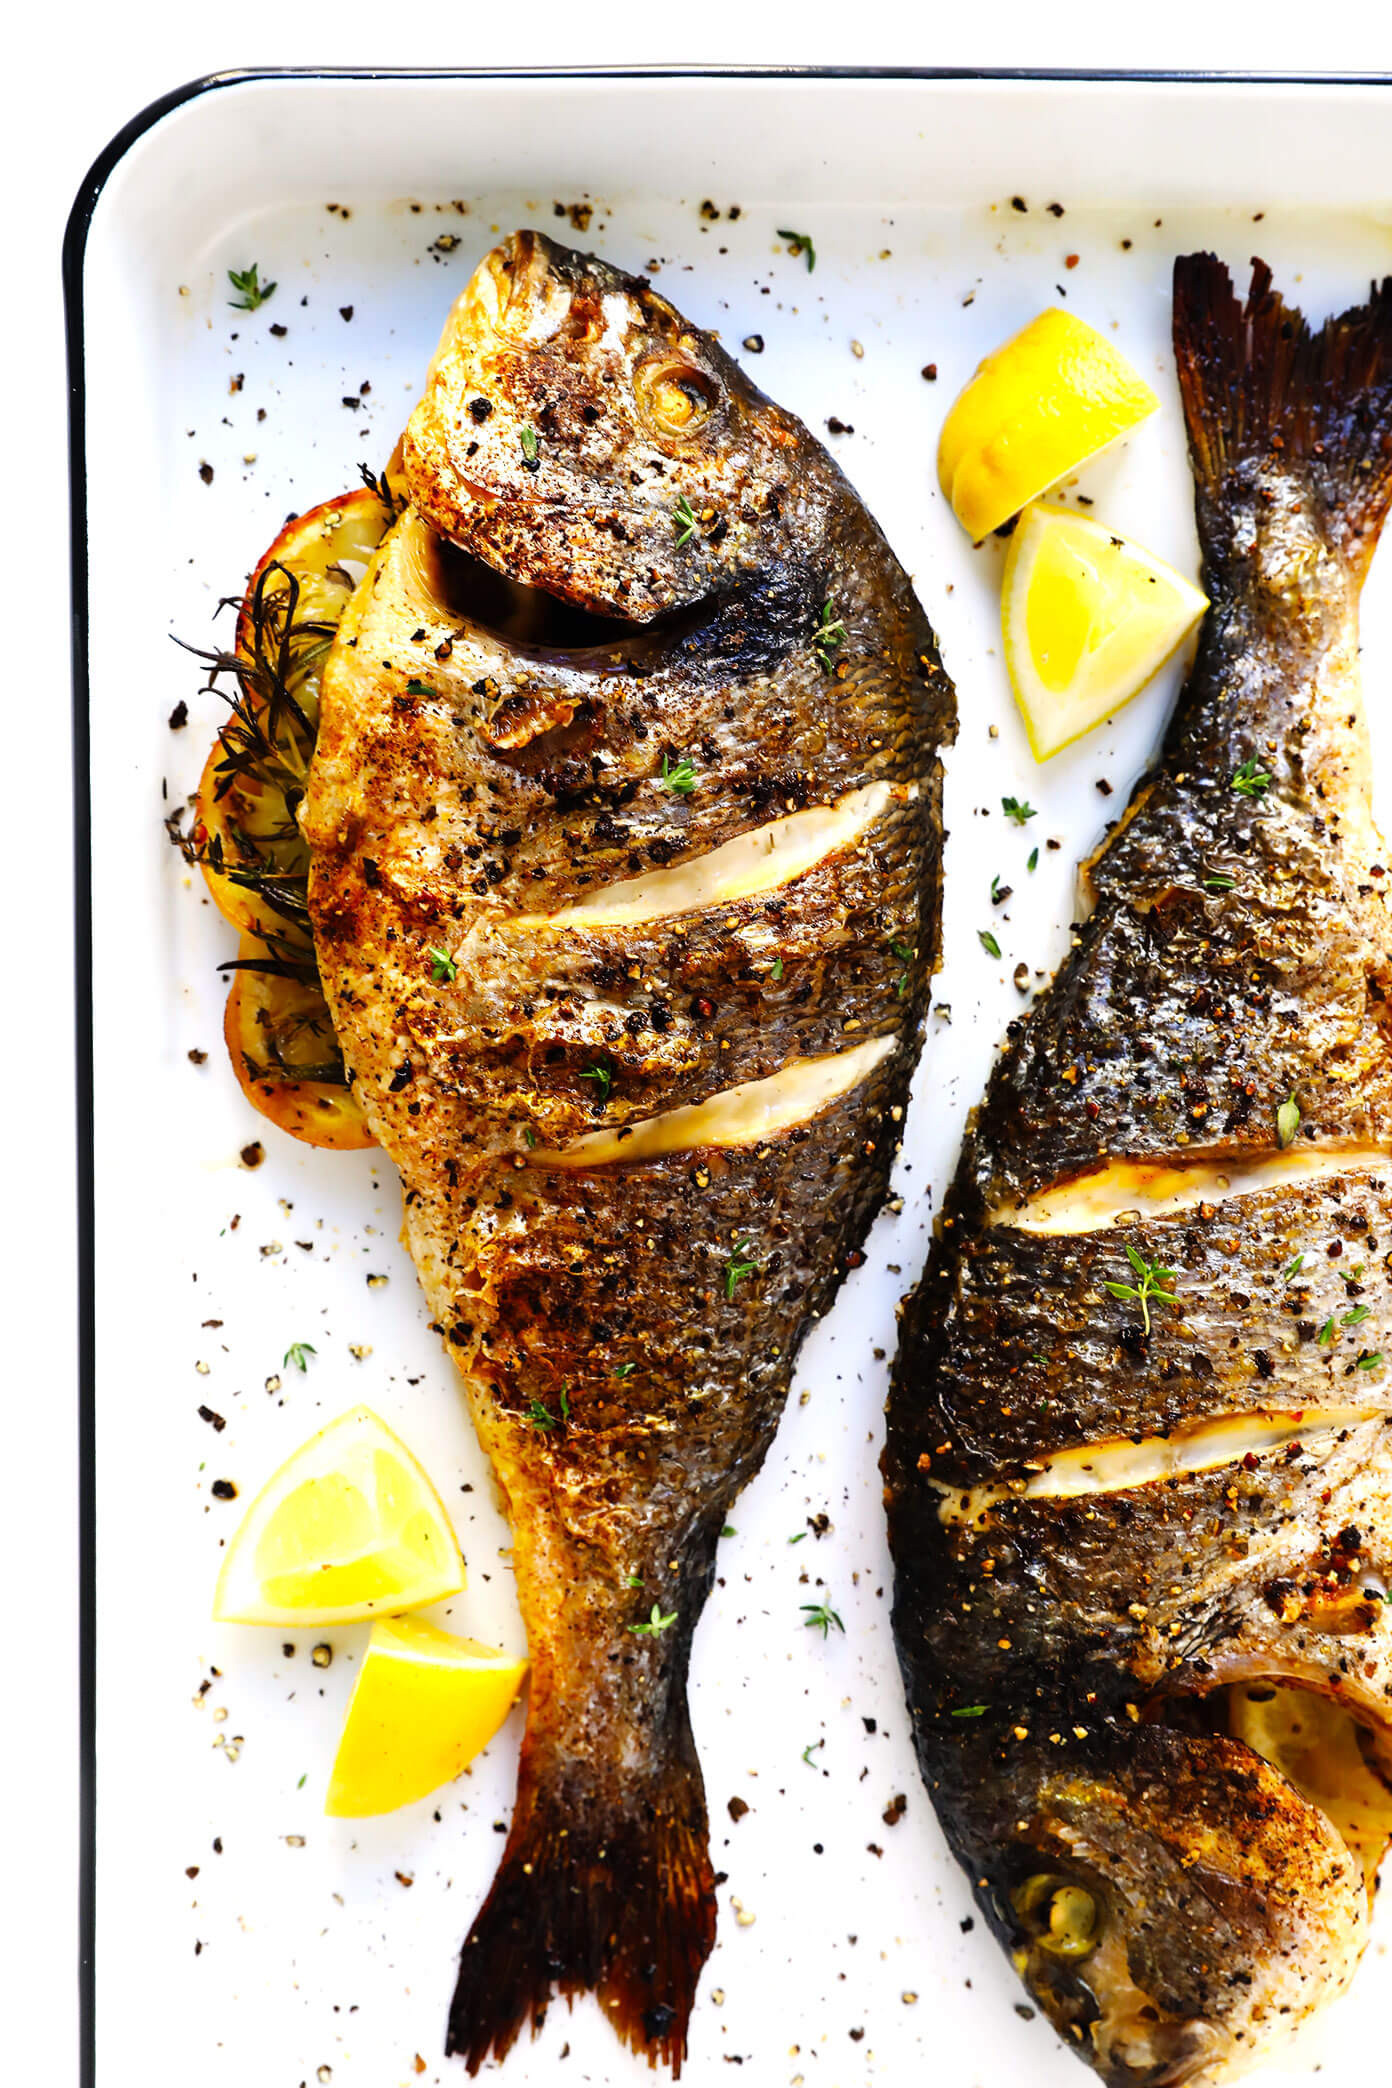 Recipes For Tilapia Fish In The Oven
 How To Cook A Whole Fish